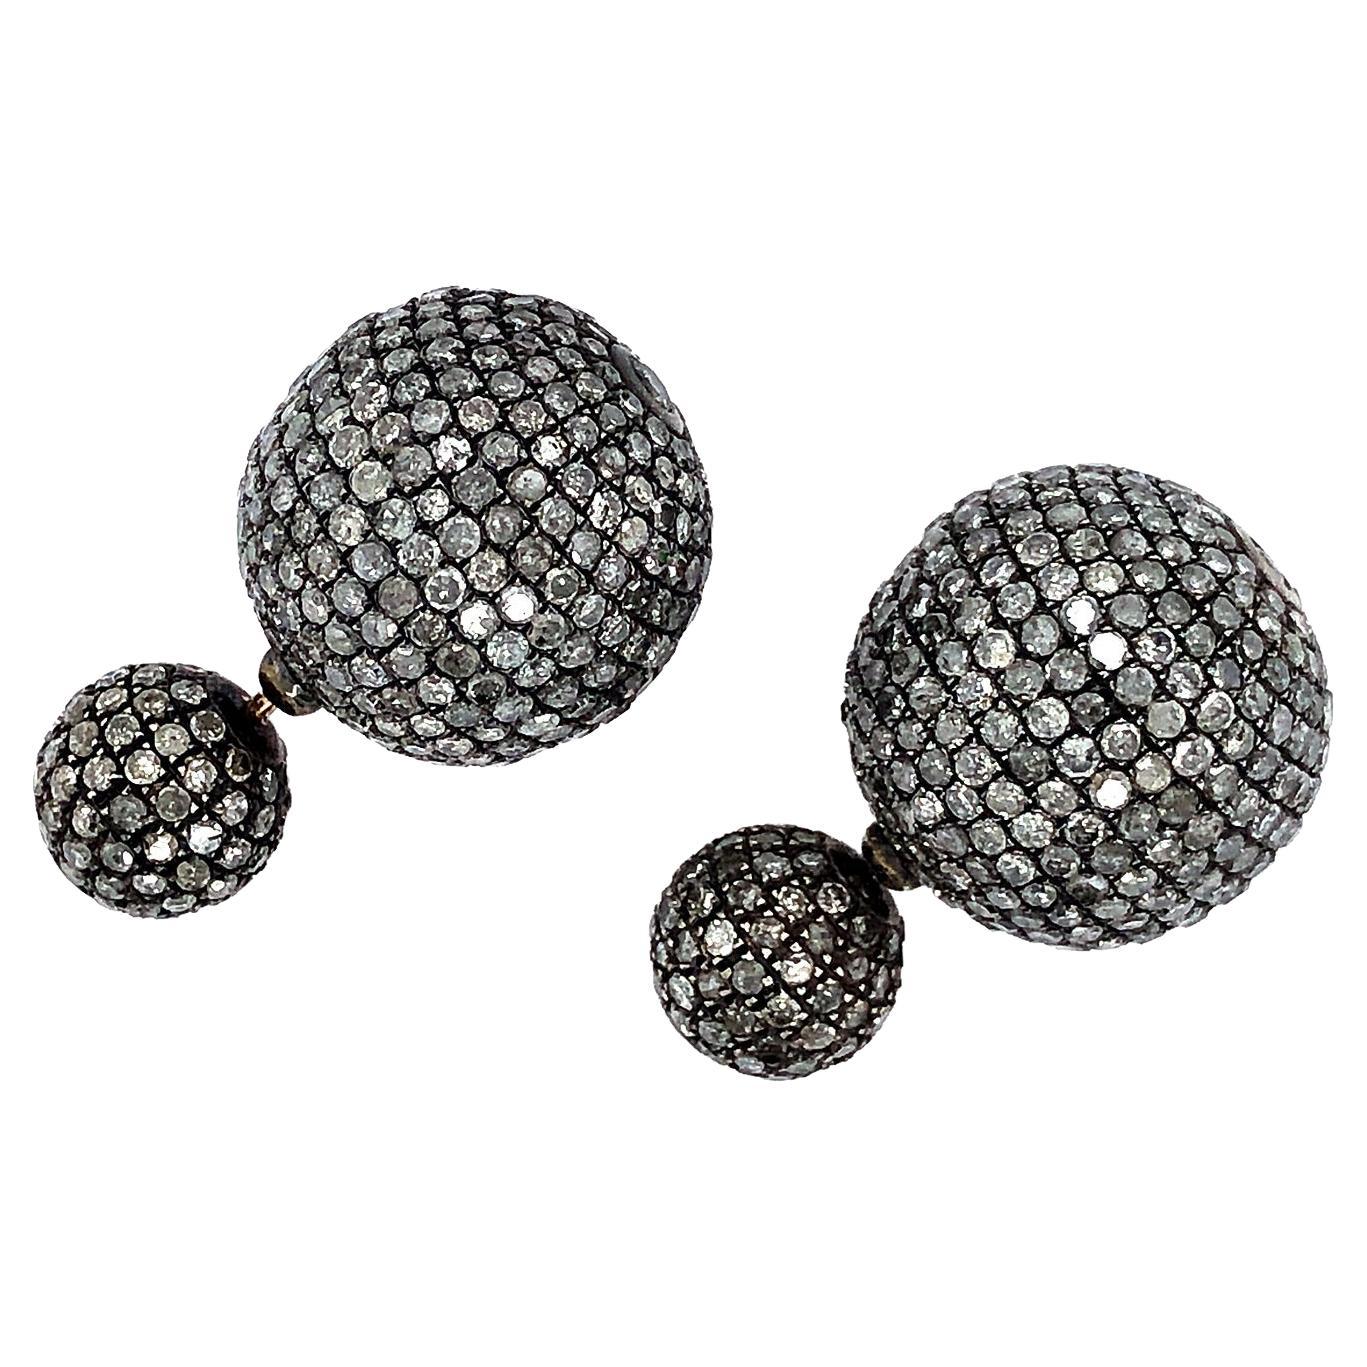 Pave Diamond Ball Tunnel Earring Made in 18k Gold & Silver